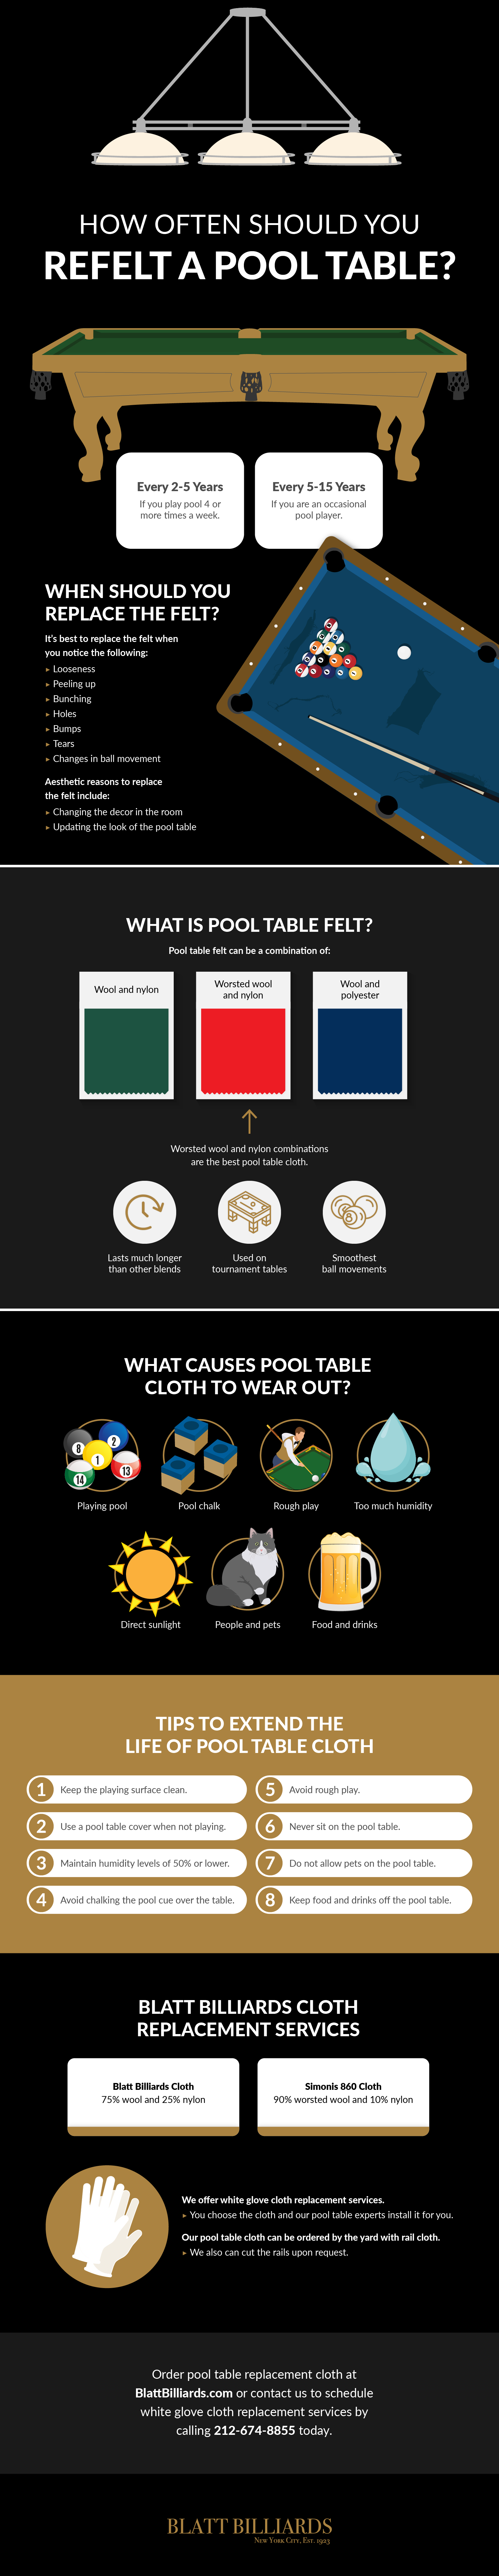 how often should you refelt a pool table infographic